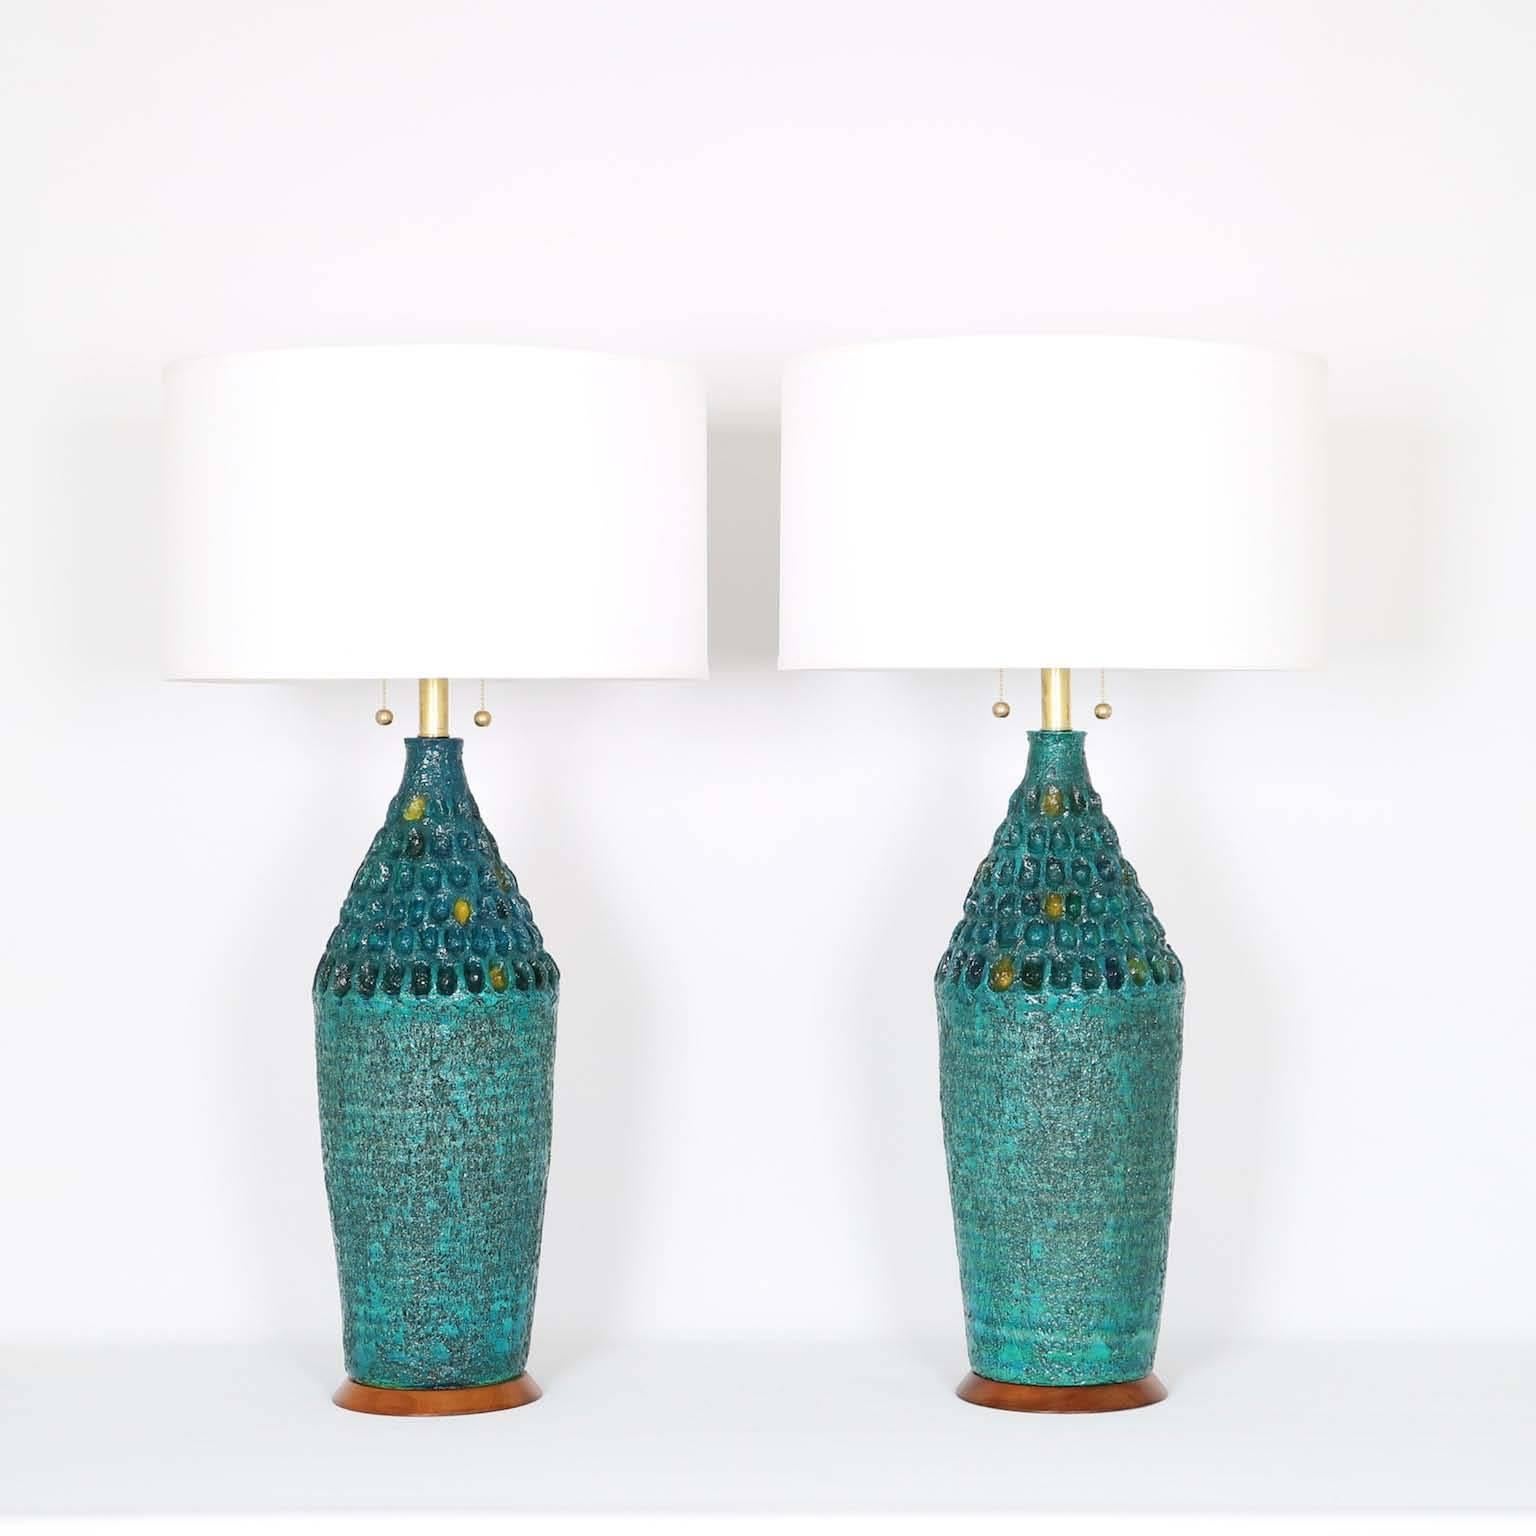 A pair of Brutalist style table lamps, produced by Quartite Creative Corp. and dated 1965, textured ceramic turquoise bodies, glazed in gorgeous tones of blues, greens and touches of yellow. The noted height is to the finial. Fully restored with all